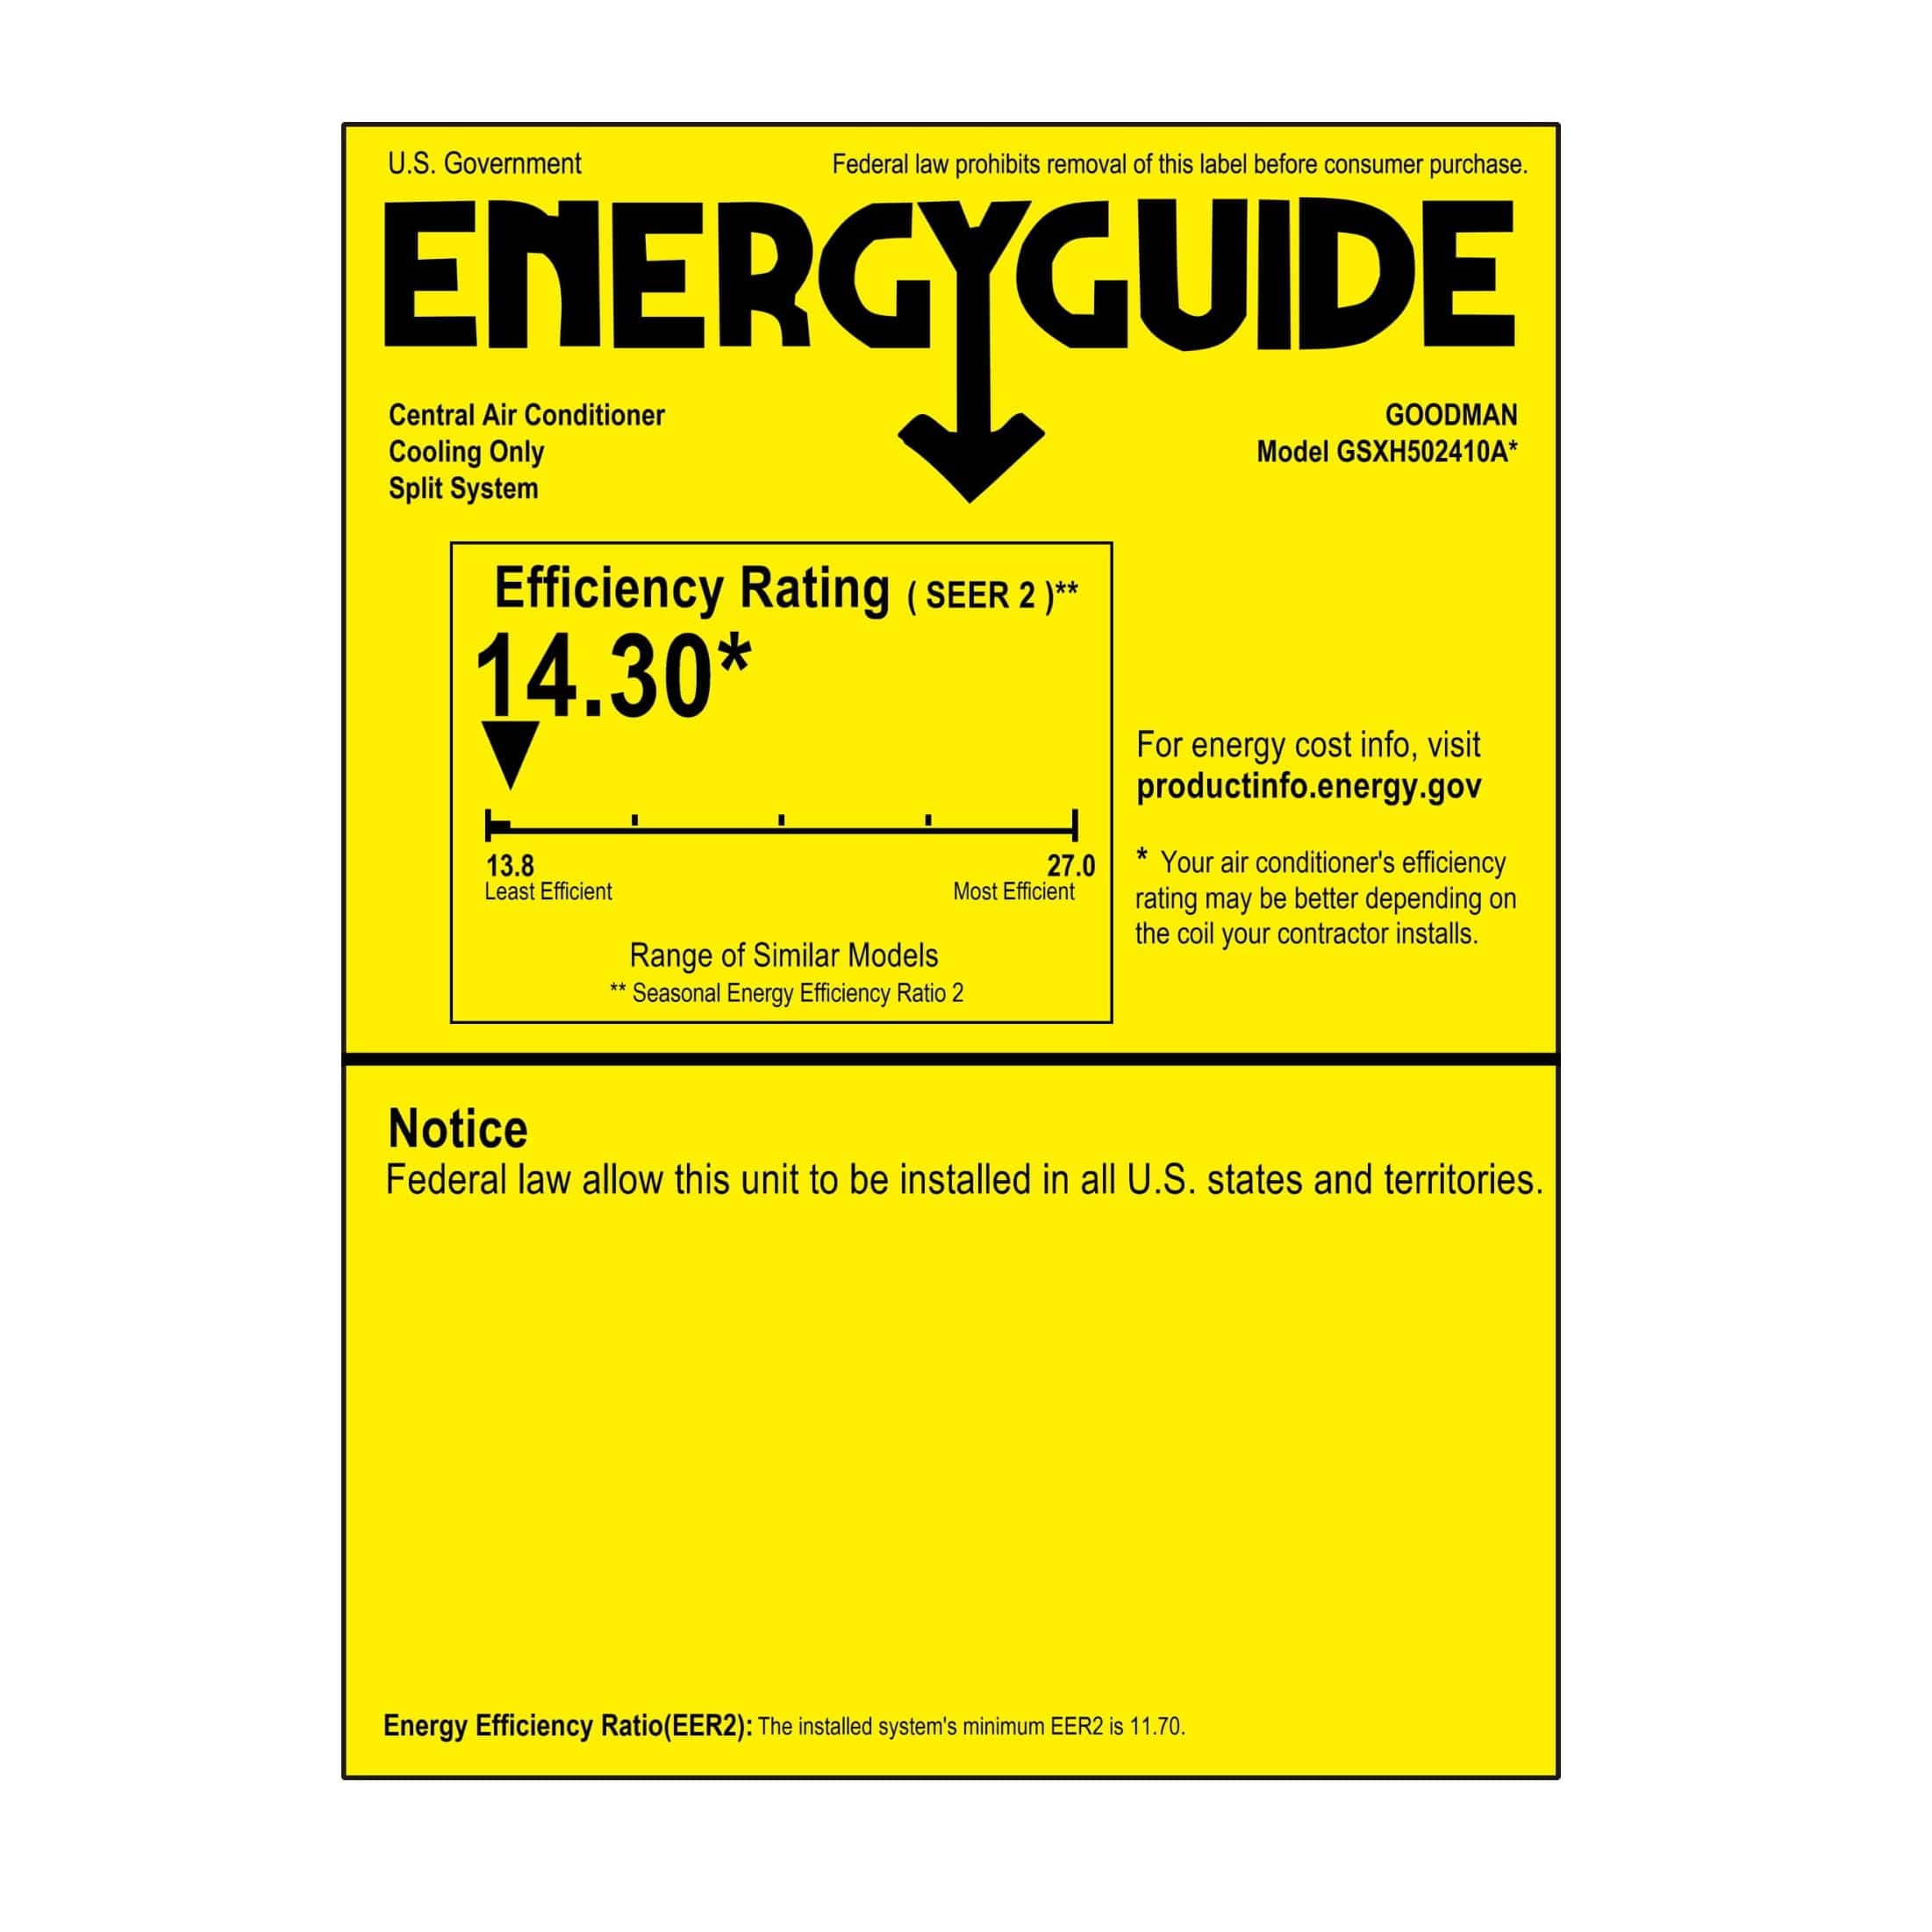 Goodman 2 Ton 15.2 SEER2 Single-Stage Air Conditioner Condenser GSXH502410 Energy Guide Label